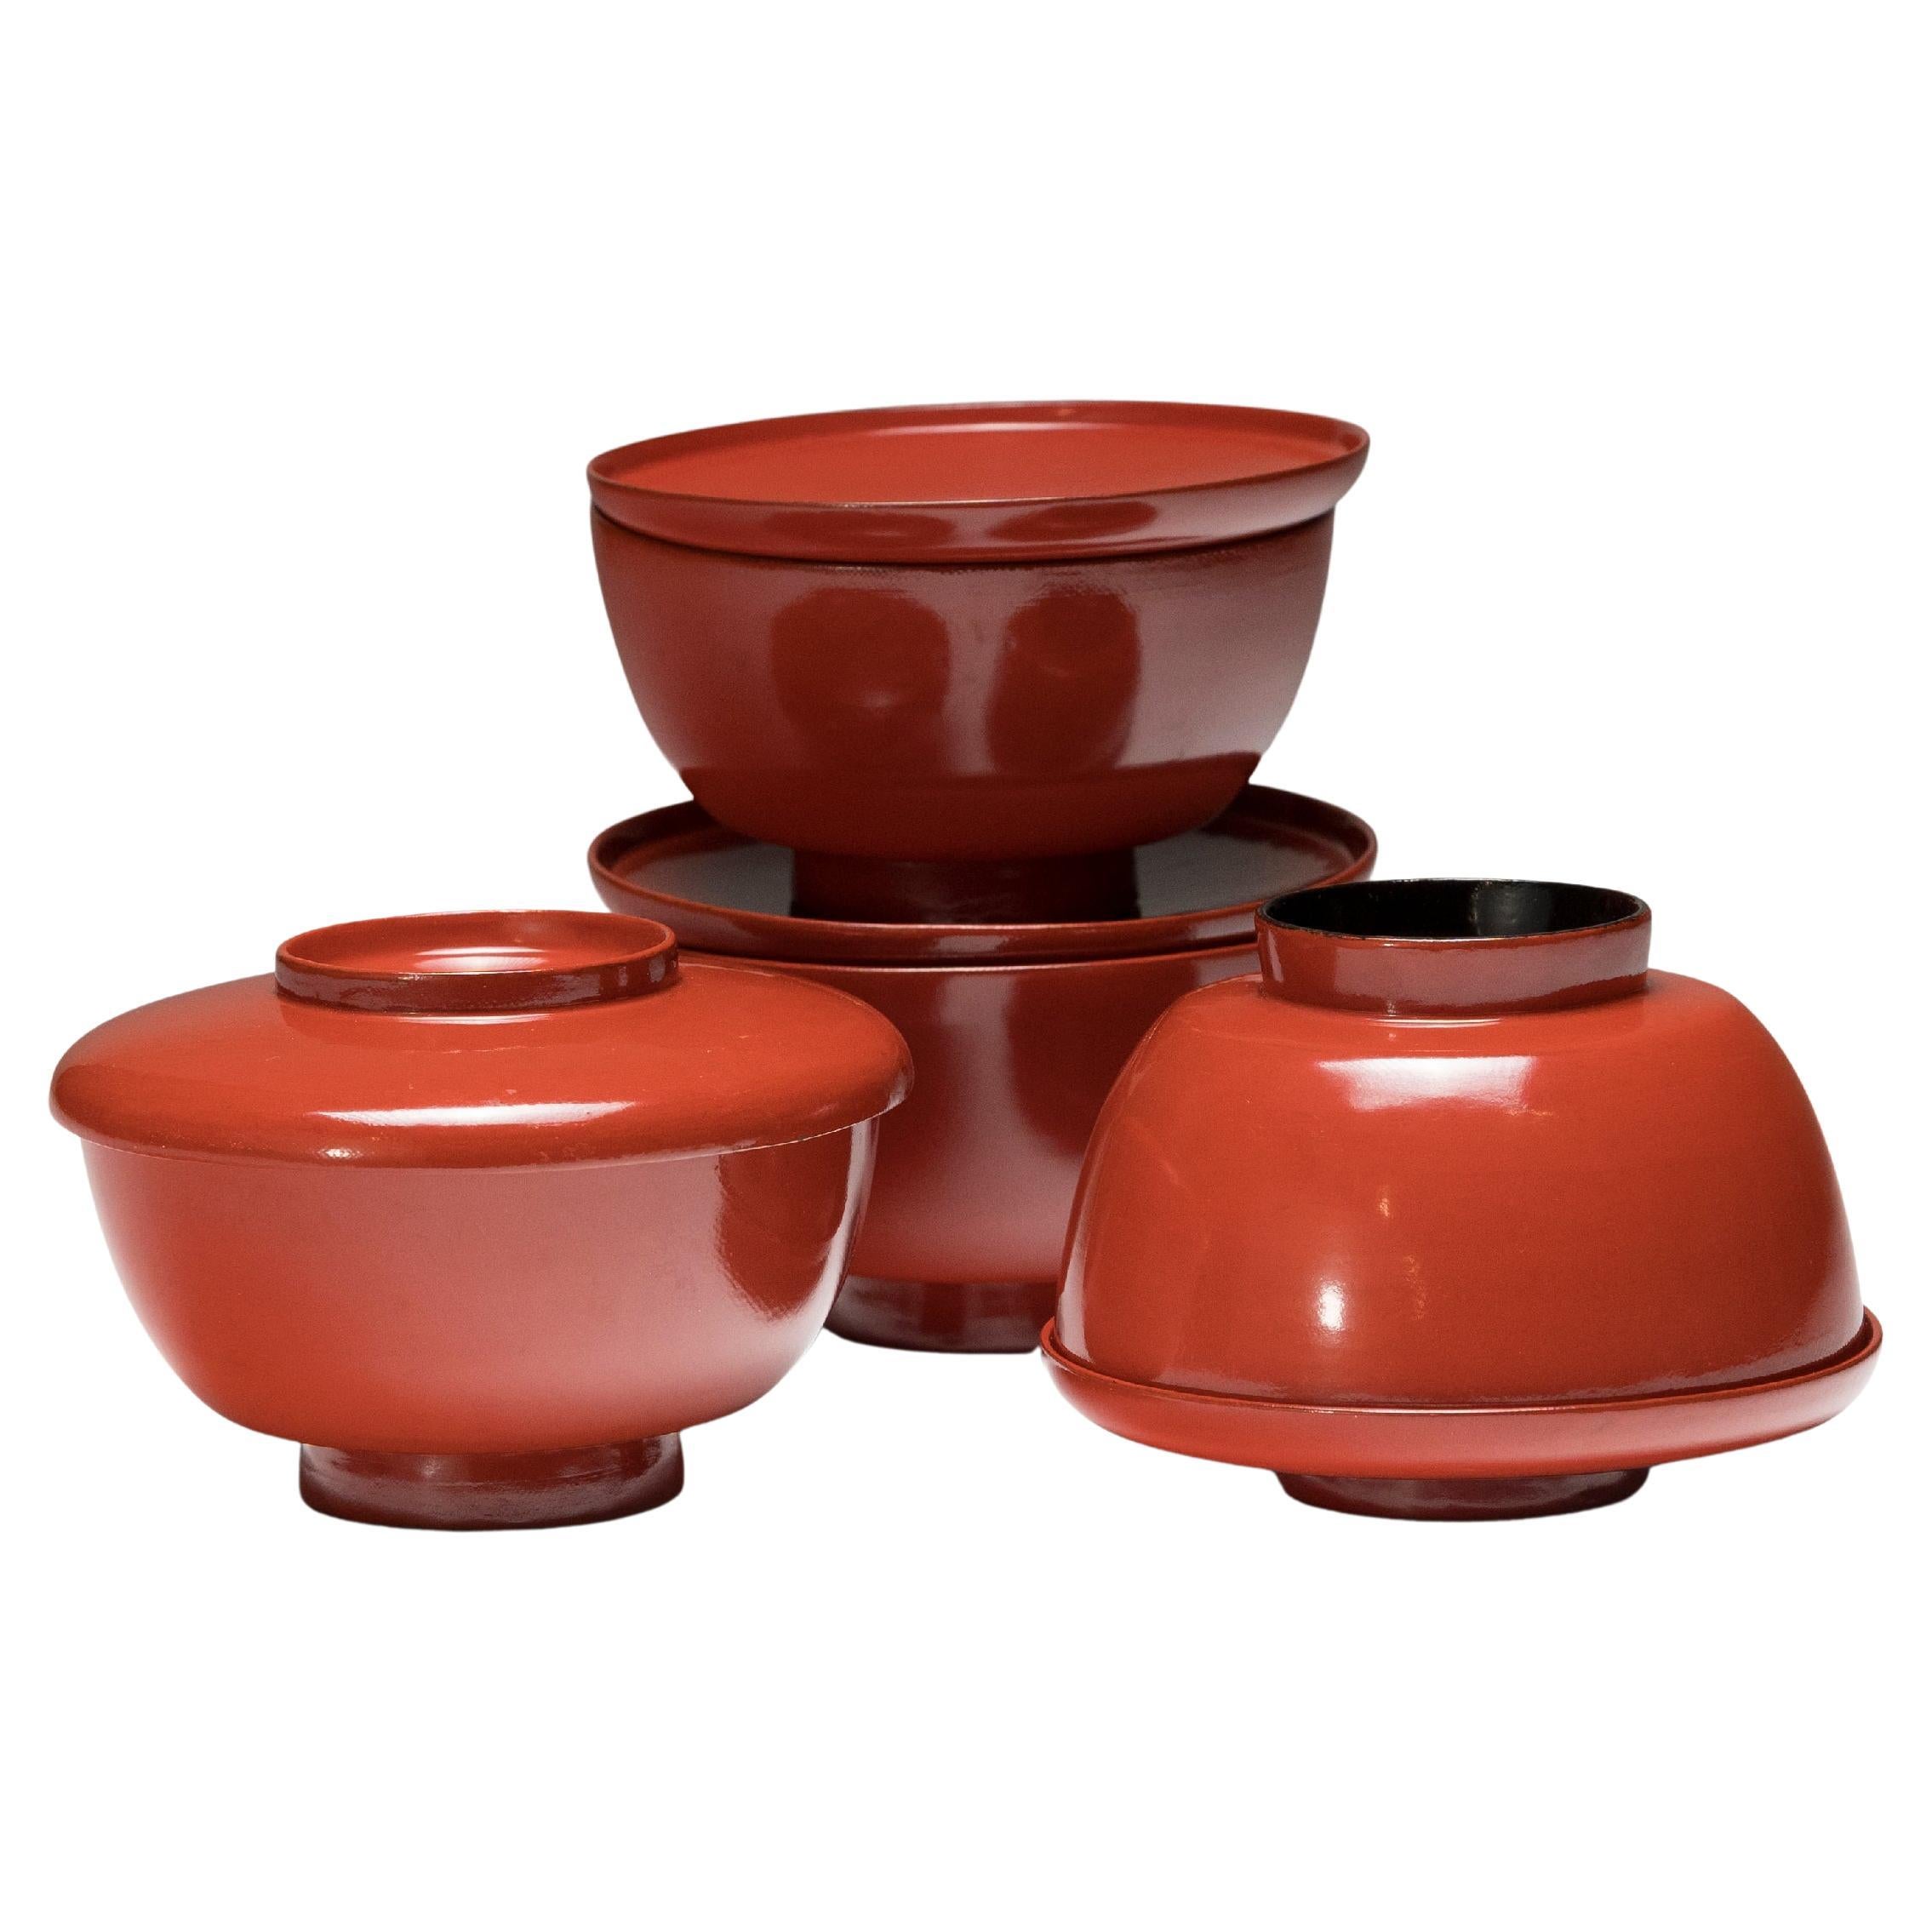 Set of Four Japanese Red Lacquer Bowls With Lids